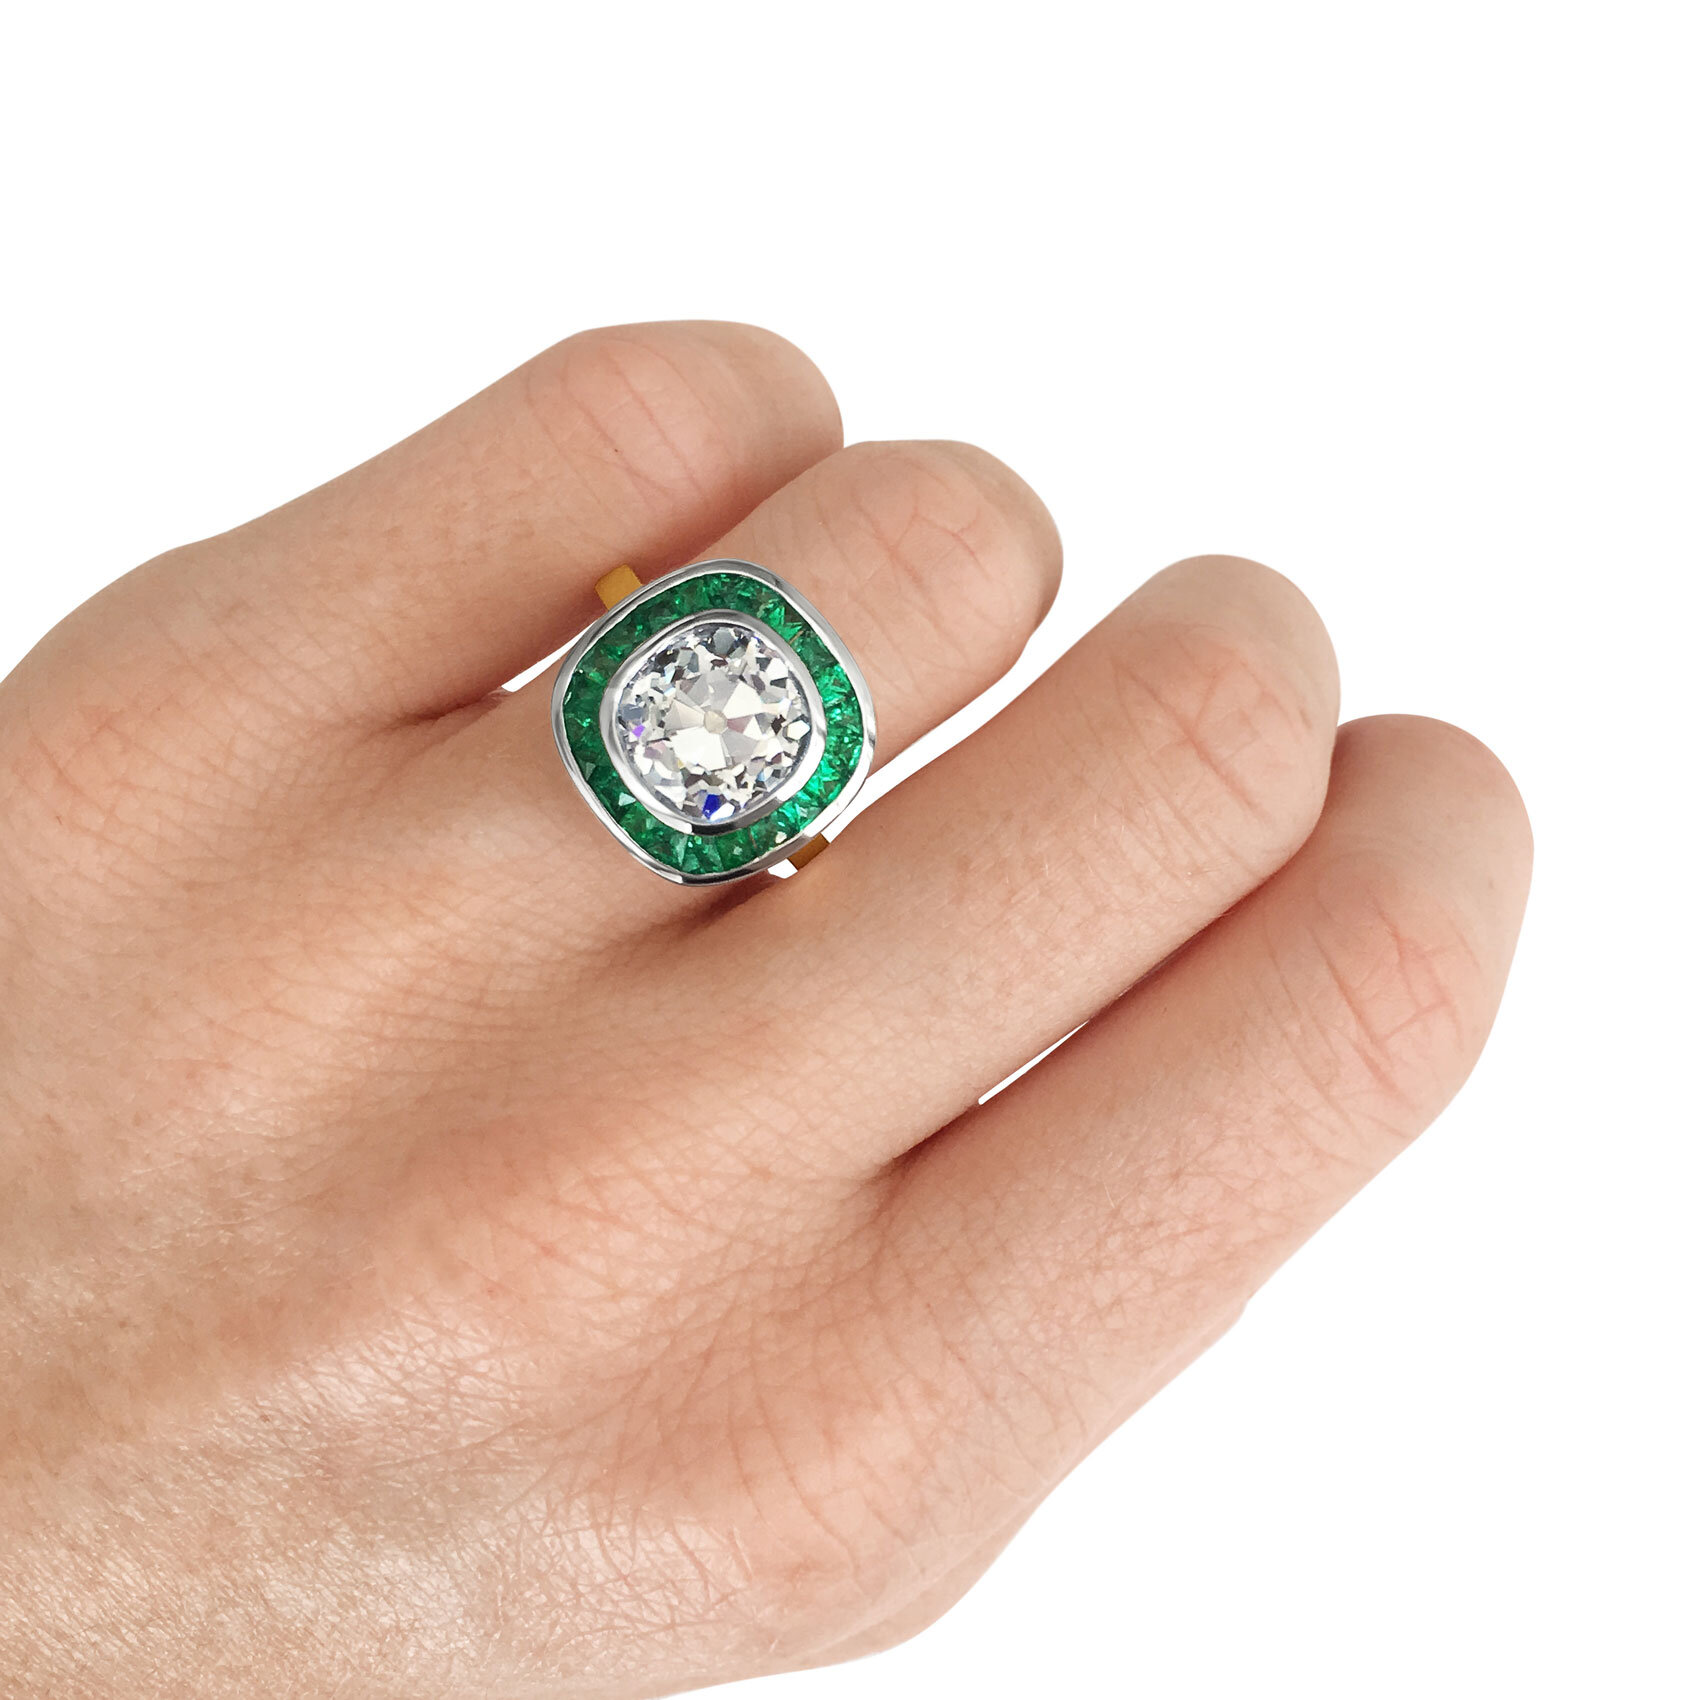 Old cut cushion-cut diamond target ring with emerald halo mounted in 18ct yellow gold. 